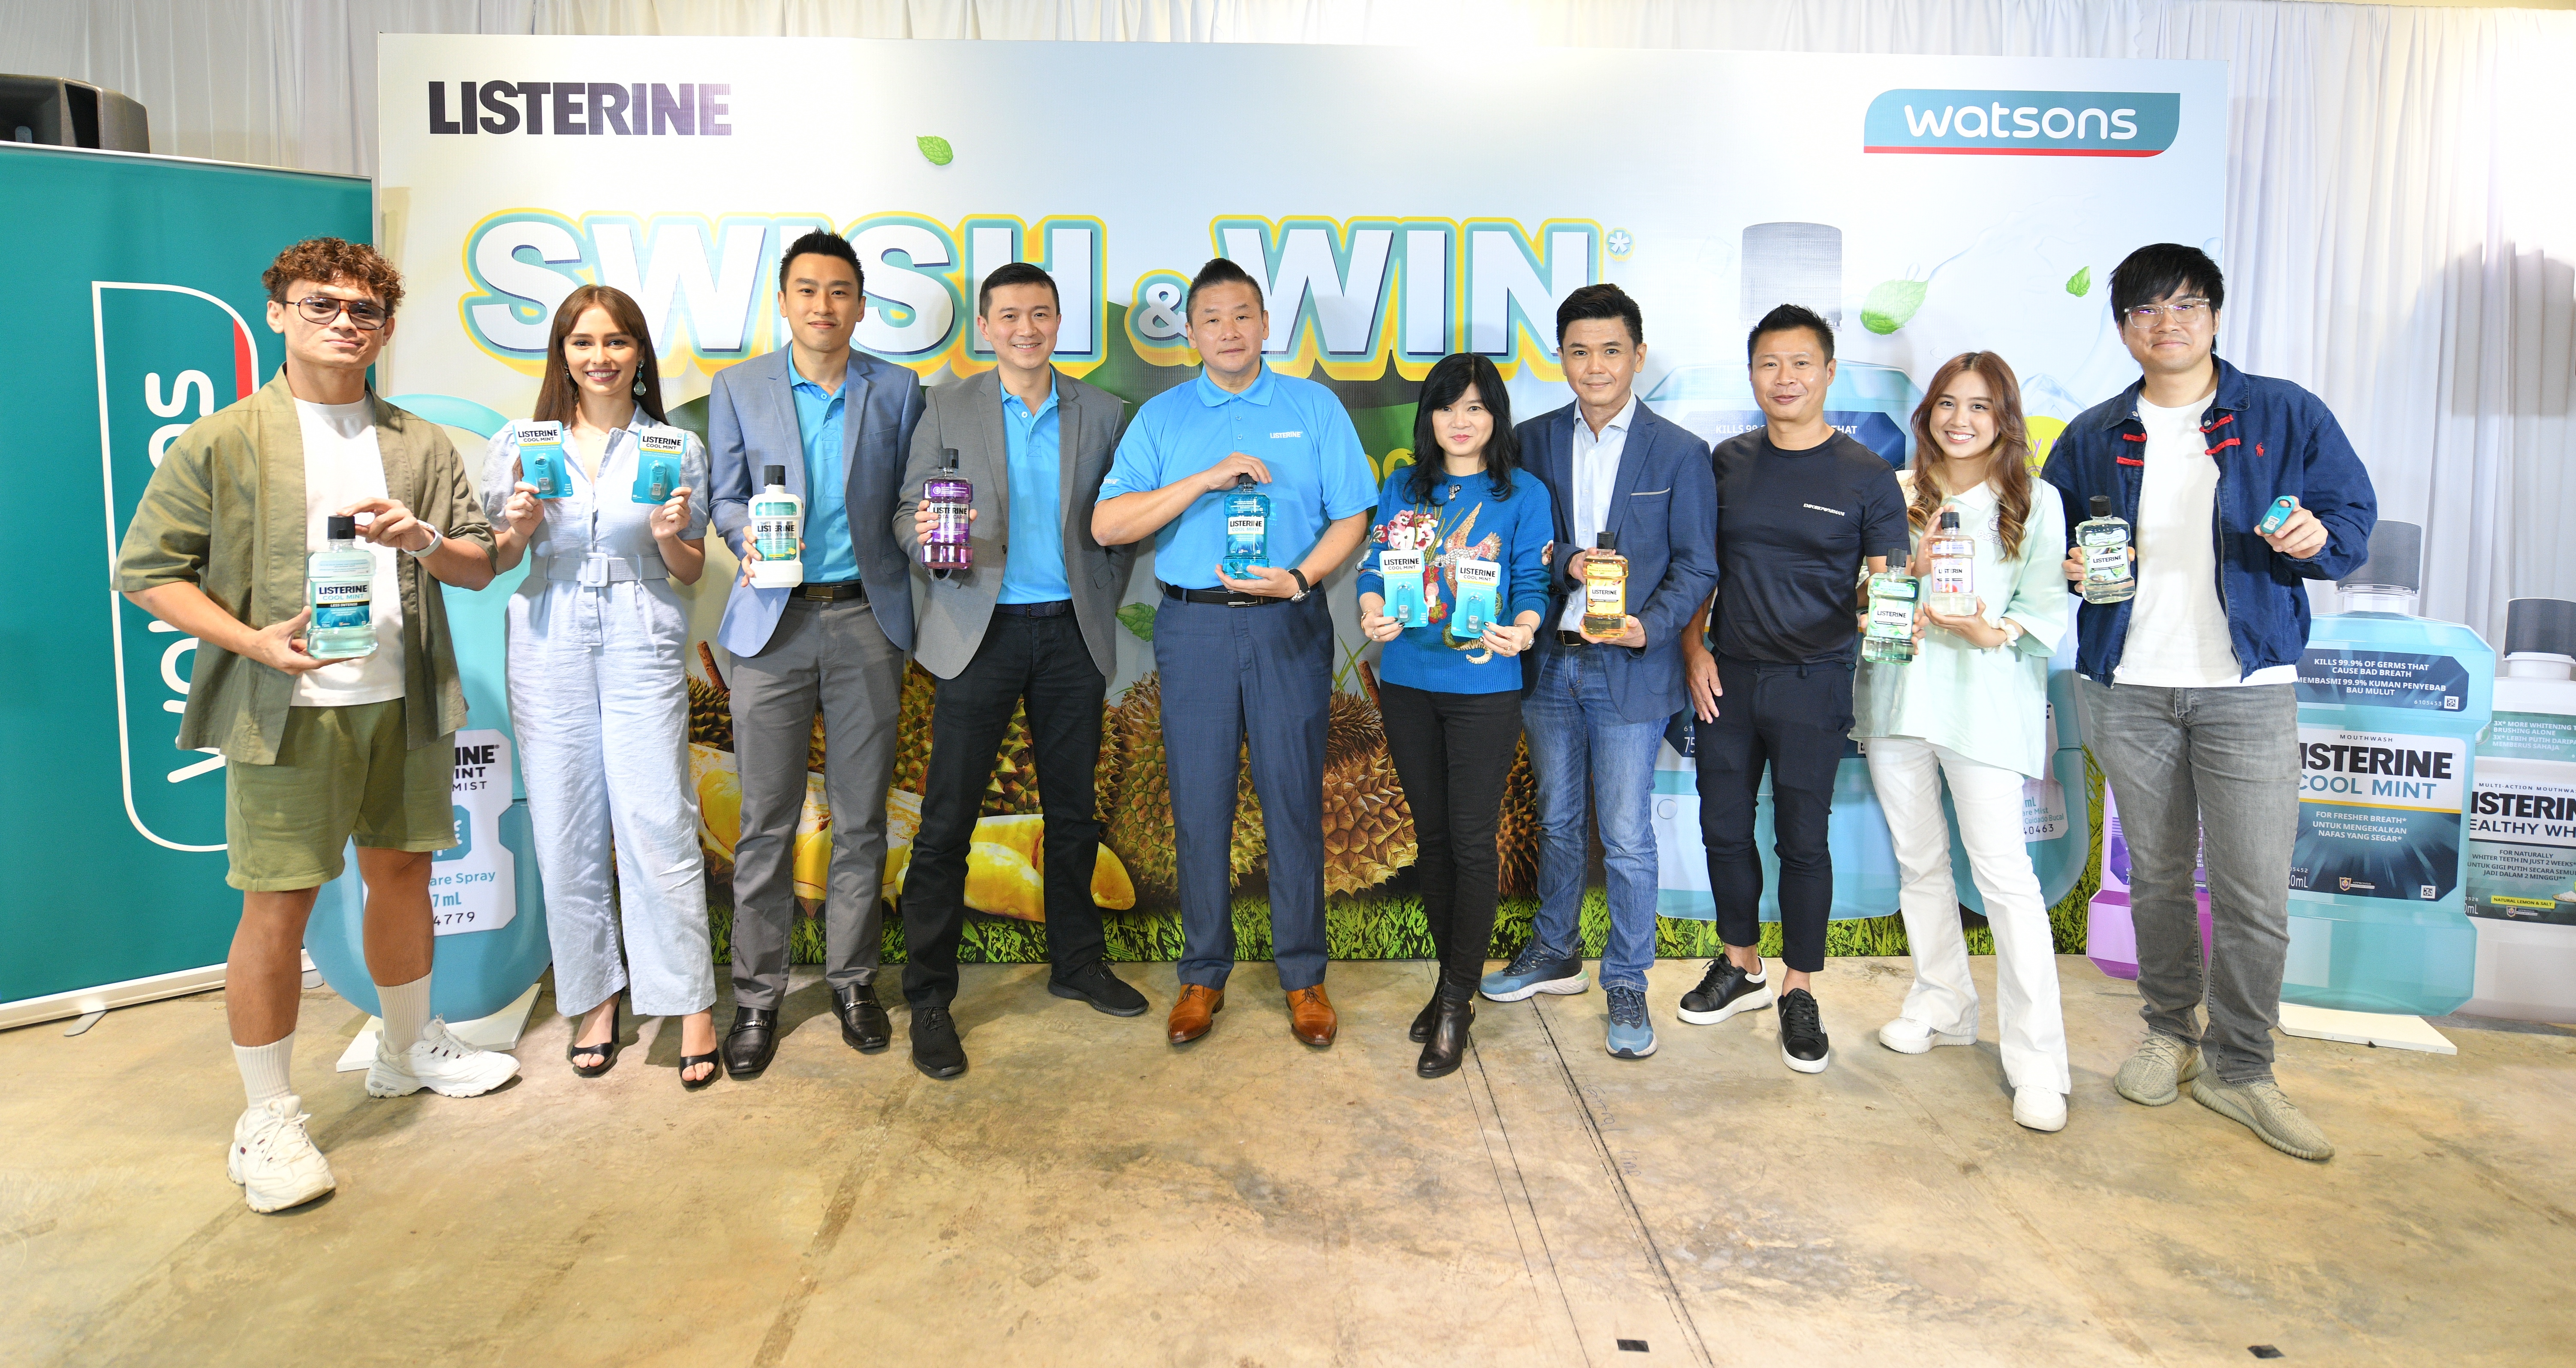 Grab Malaysia Accelerates Access to Earning Opportunities with almost  RM300,000 worth of lucky draw prizes